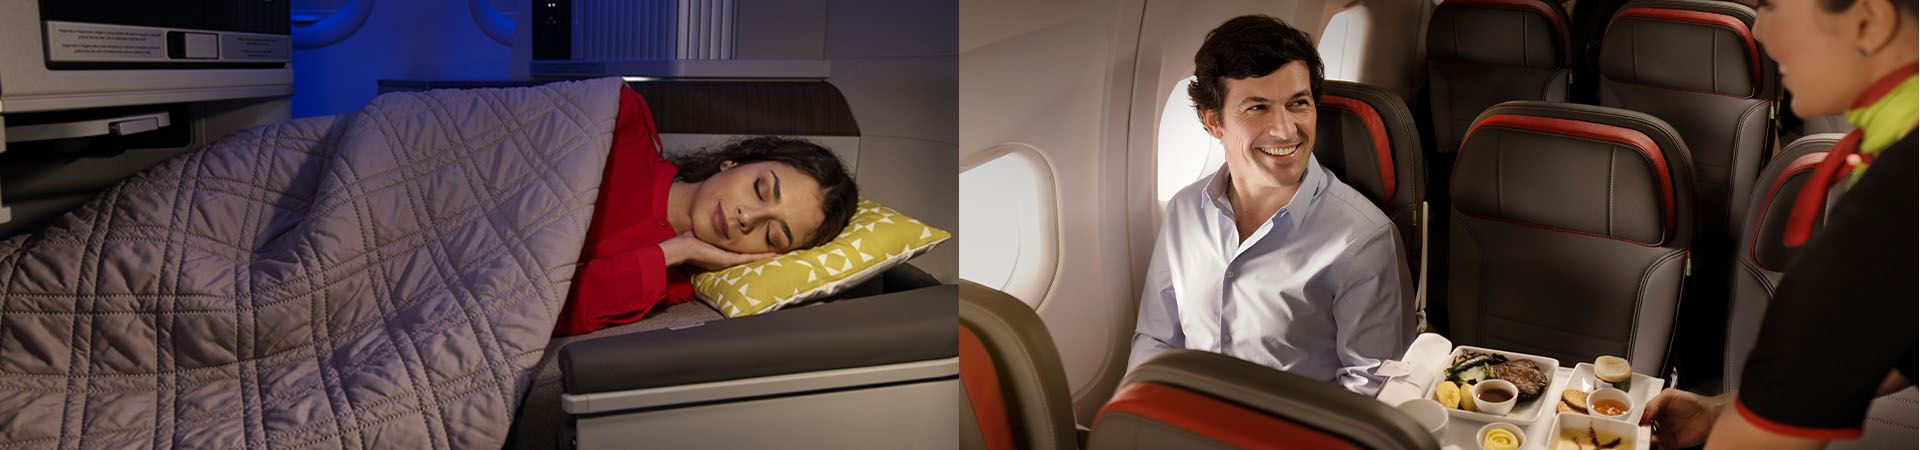 A composite picture consisting of two images. The image on the left shows a girl with a red sweater sleeping comfortably in a spacious TAP Executive Class seat, with a green and white pillow under her head and covered with a gray blanket. The image on the left shows a young man sitting by the window of a TAP plane and smiling at a hostess who is handing him an exquisite meal on a white tray.